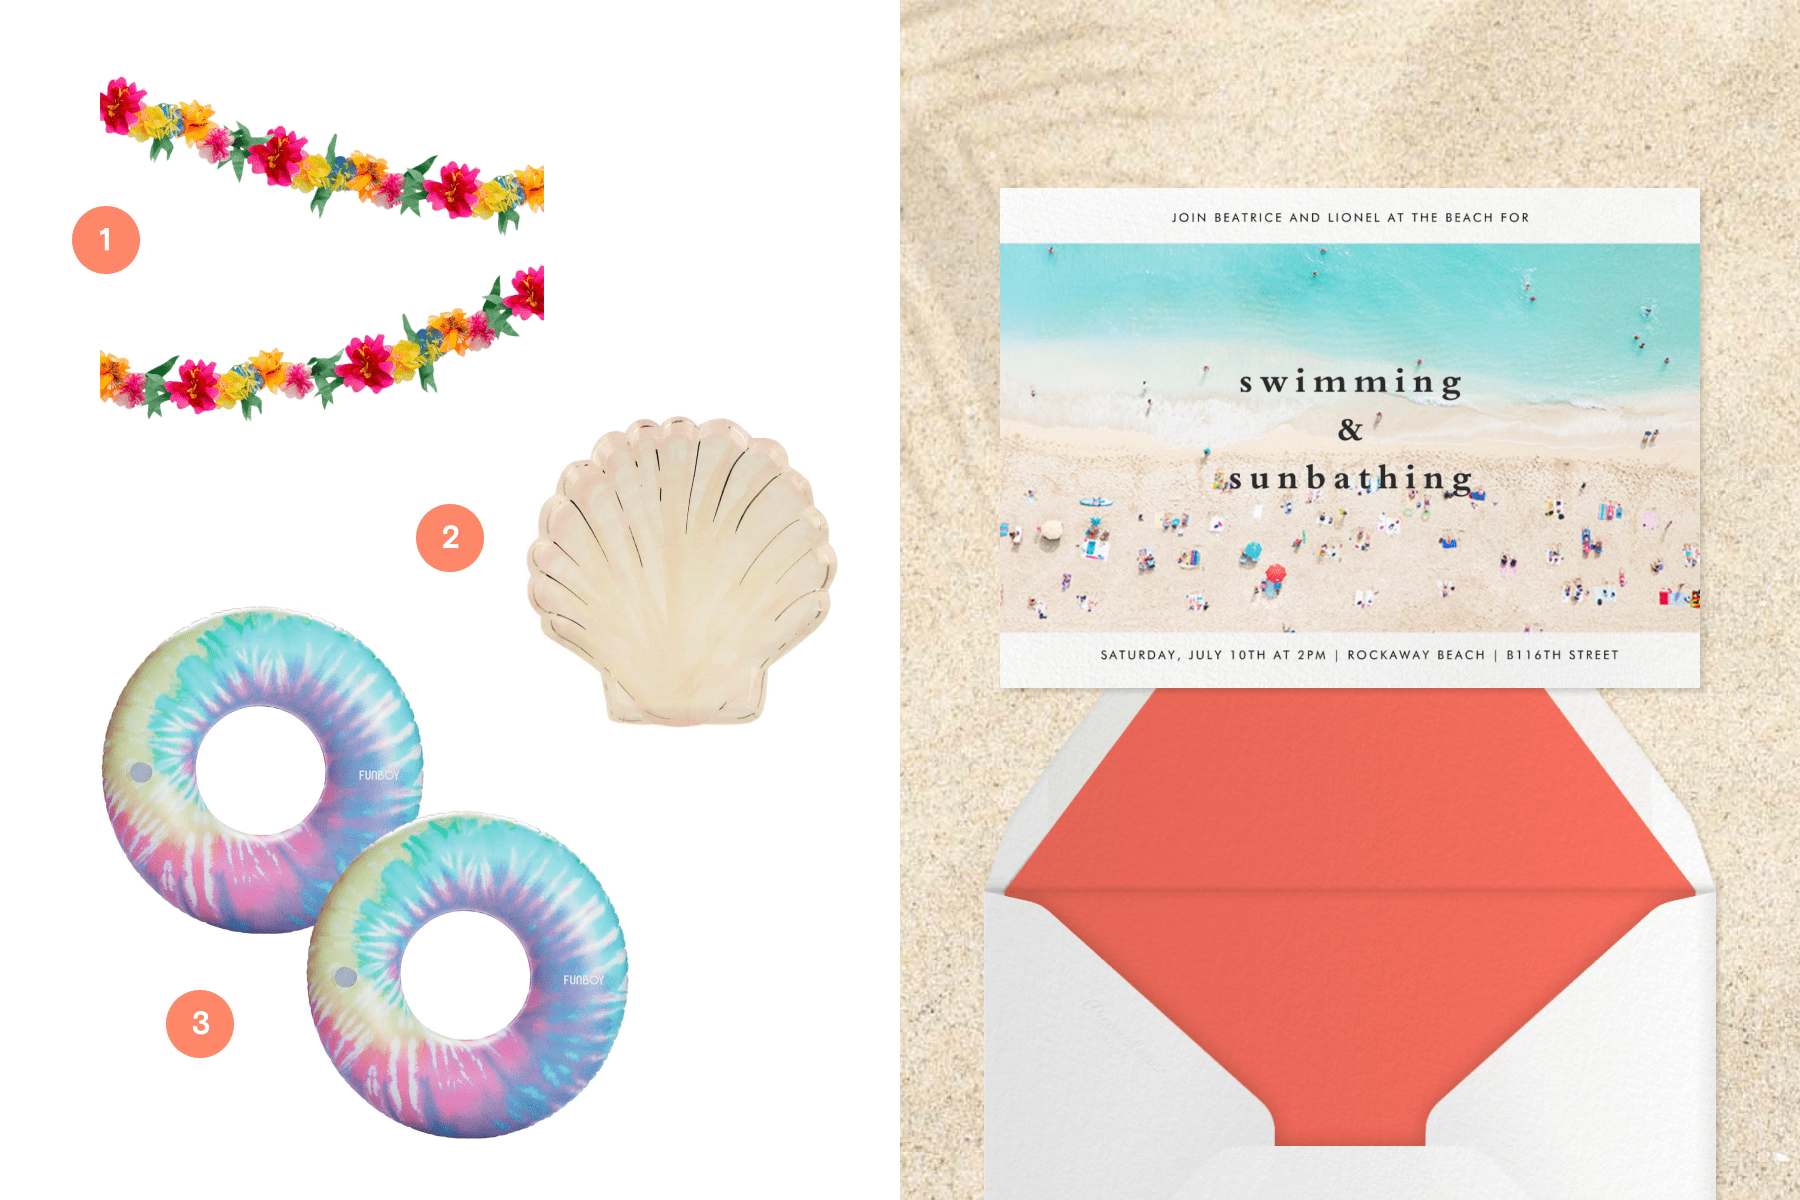 Left: Tropical flower garland, tie-dye inner tubes, a scallop party plate. Right: An invitation that features an overhead photo of people on the beach. 